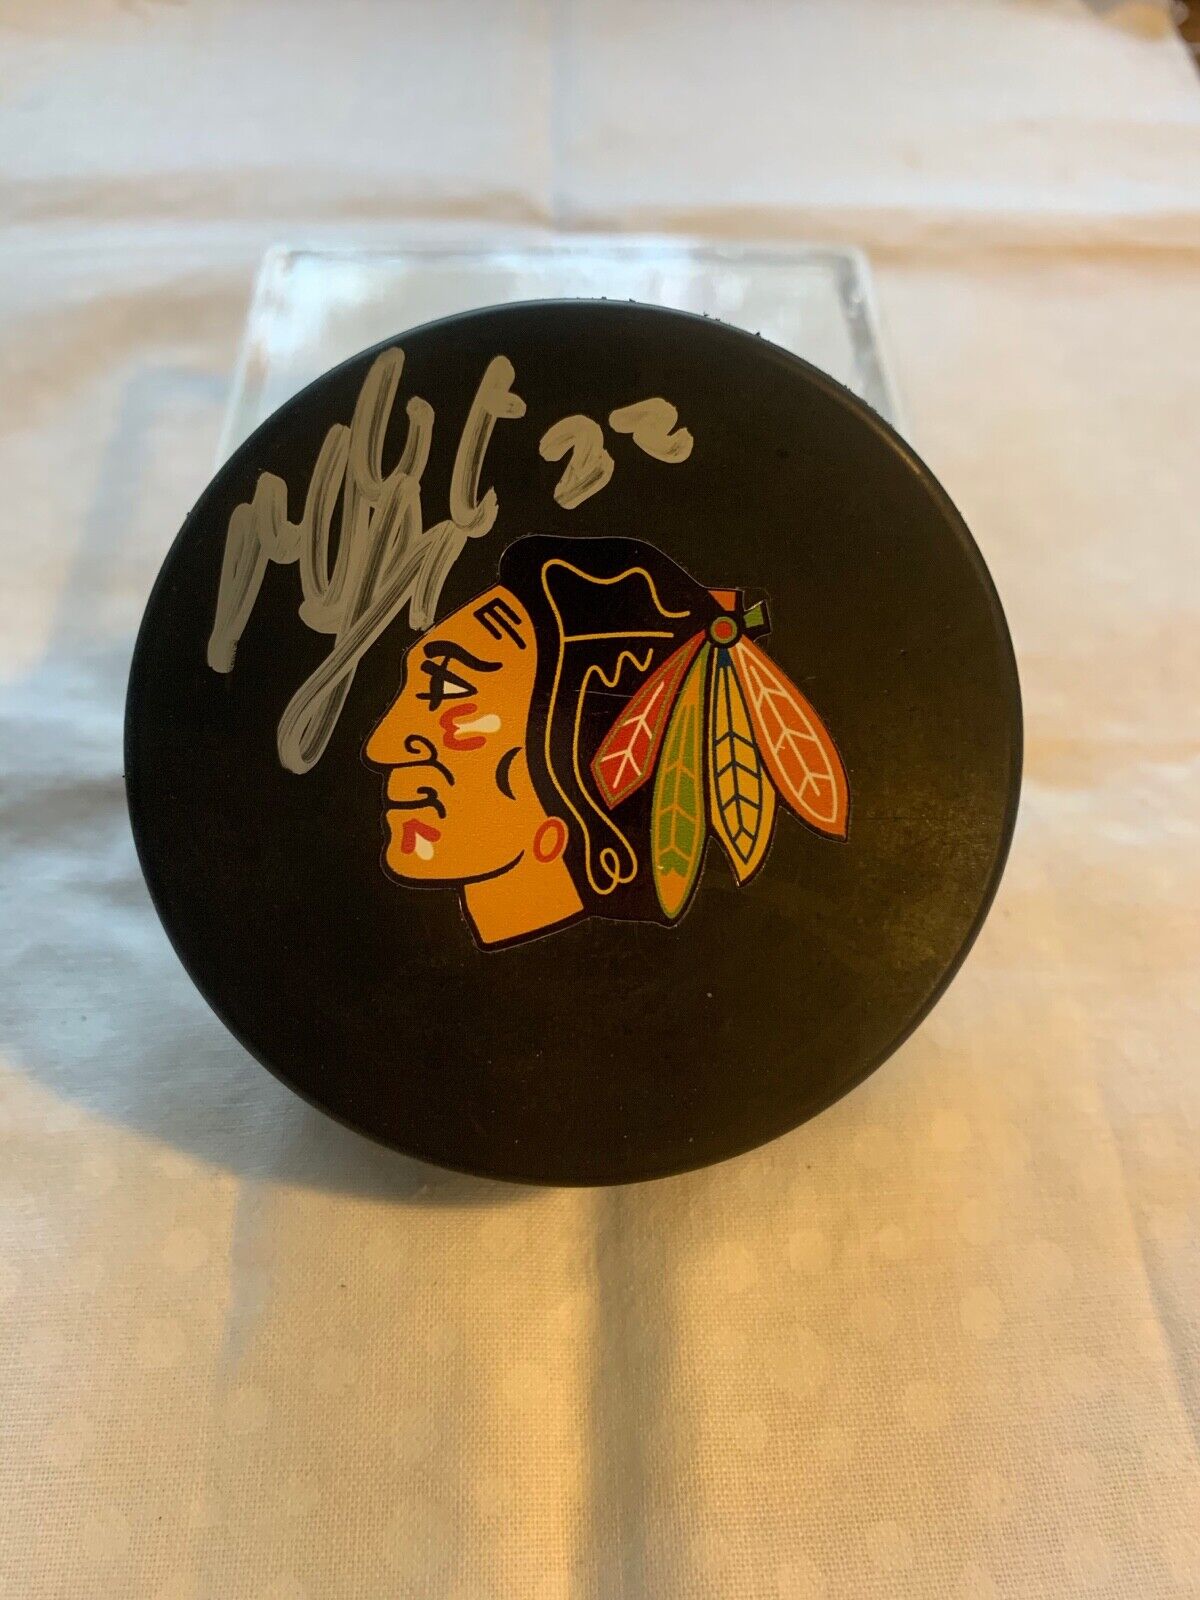 Chicago Blackhawks Puck 2 Autographed by Martin Lapointe w/ All Sports COA